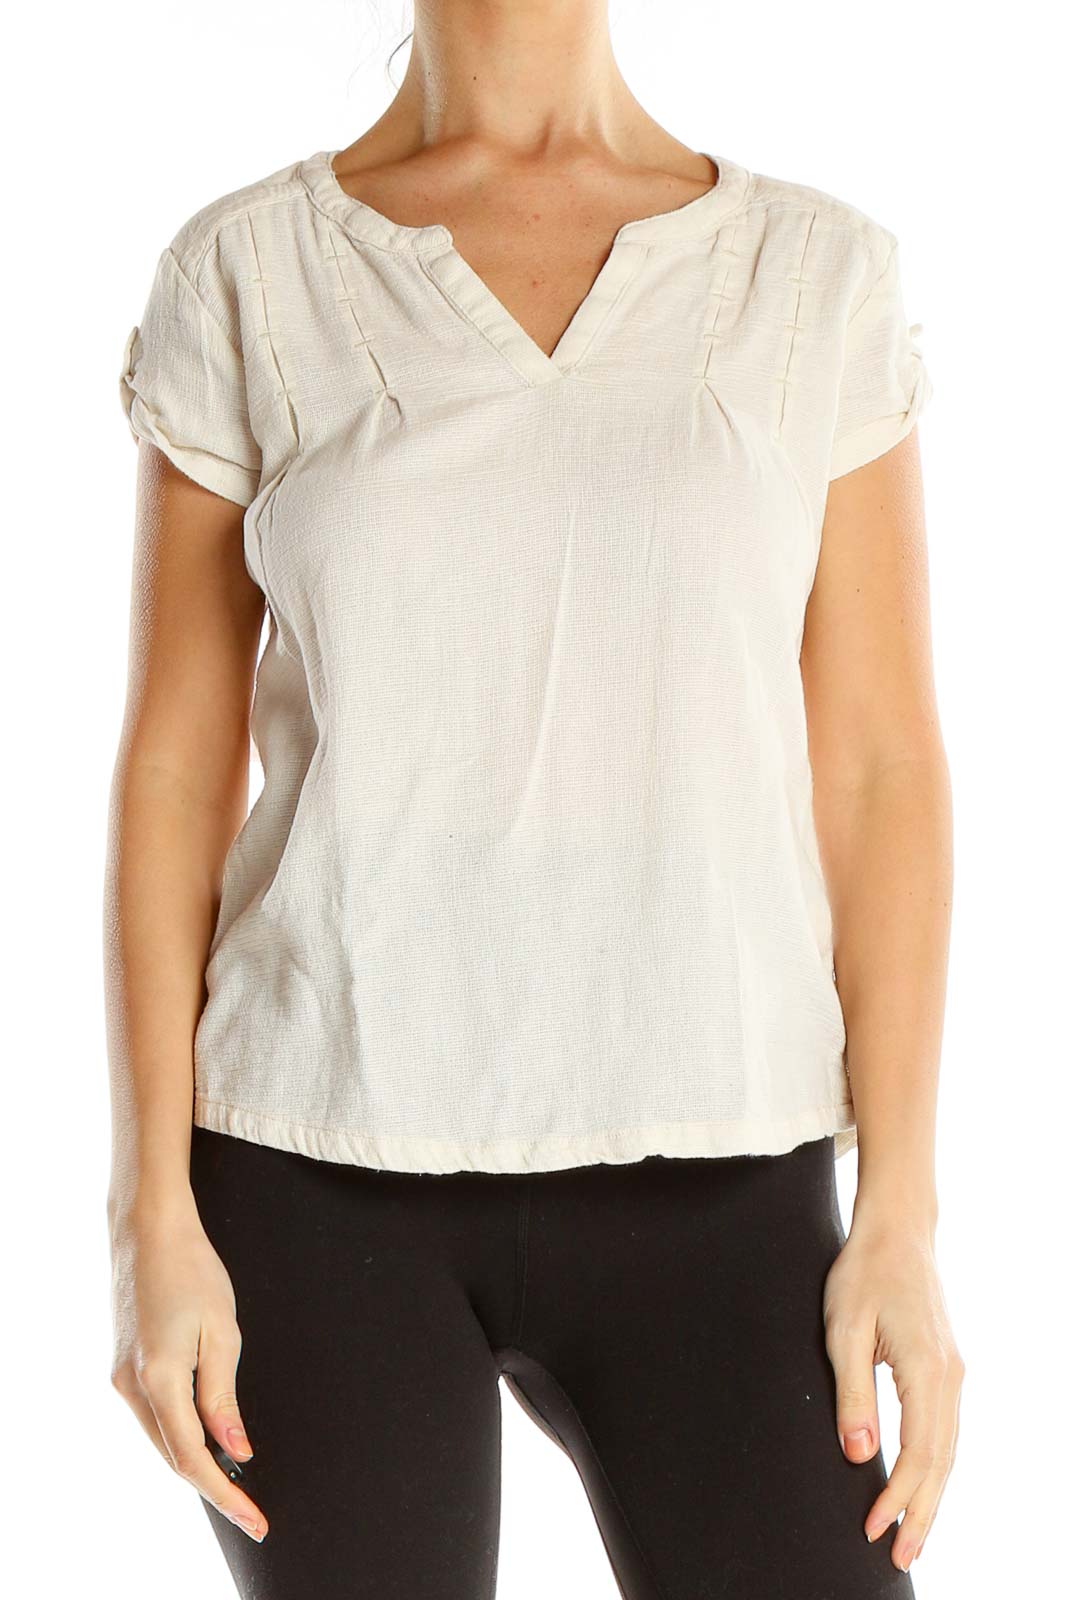 Beige All Day Wear Top Front